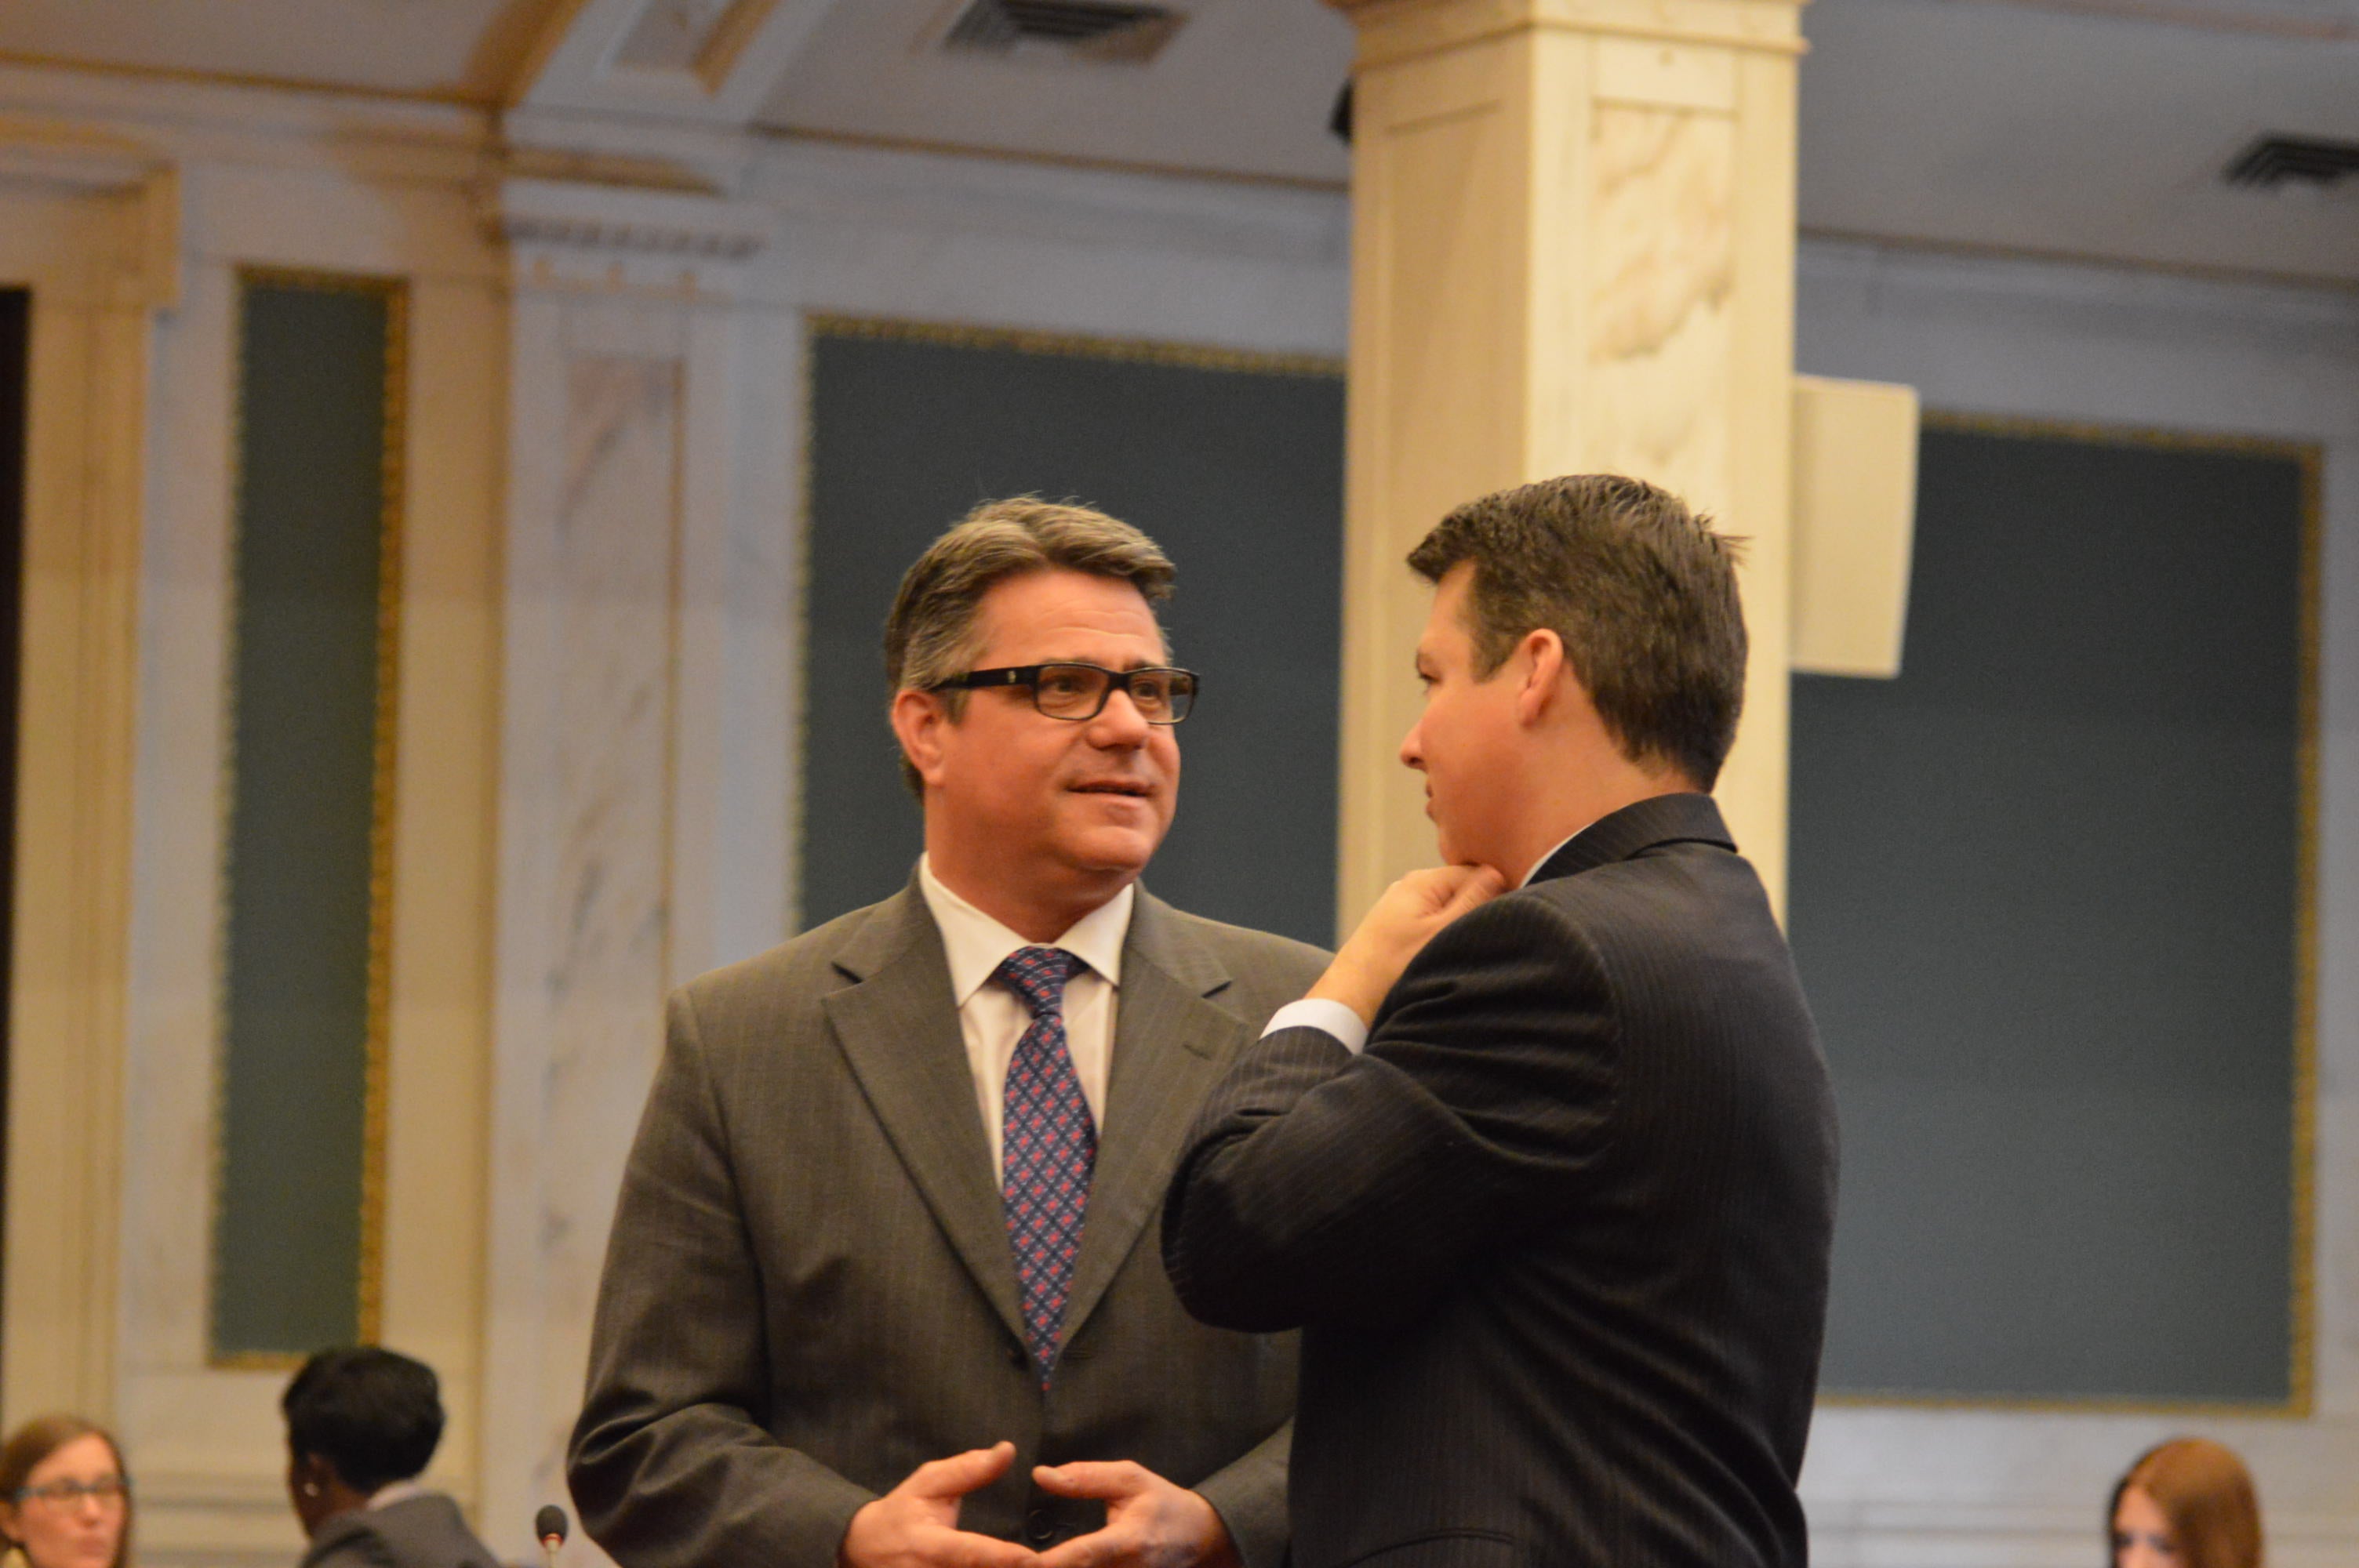  Councilman Bobby Henon speaks with U.S. Rep. Brendan Boyle prior to the hearing. (Tom MacDonald/WHYY) 